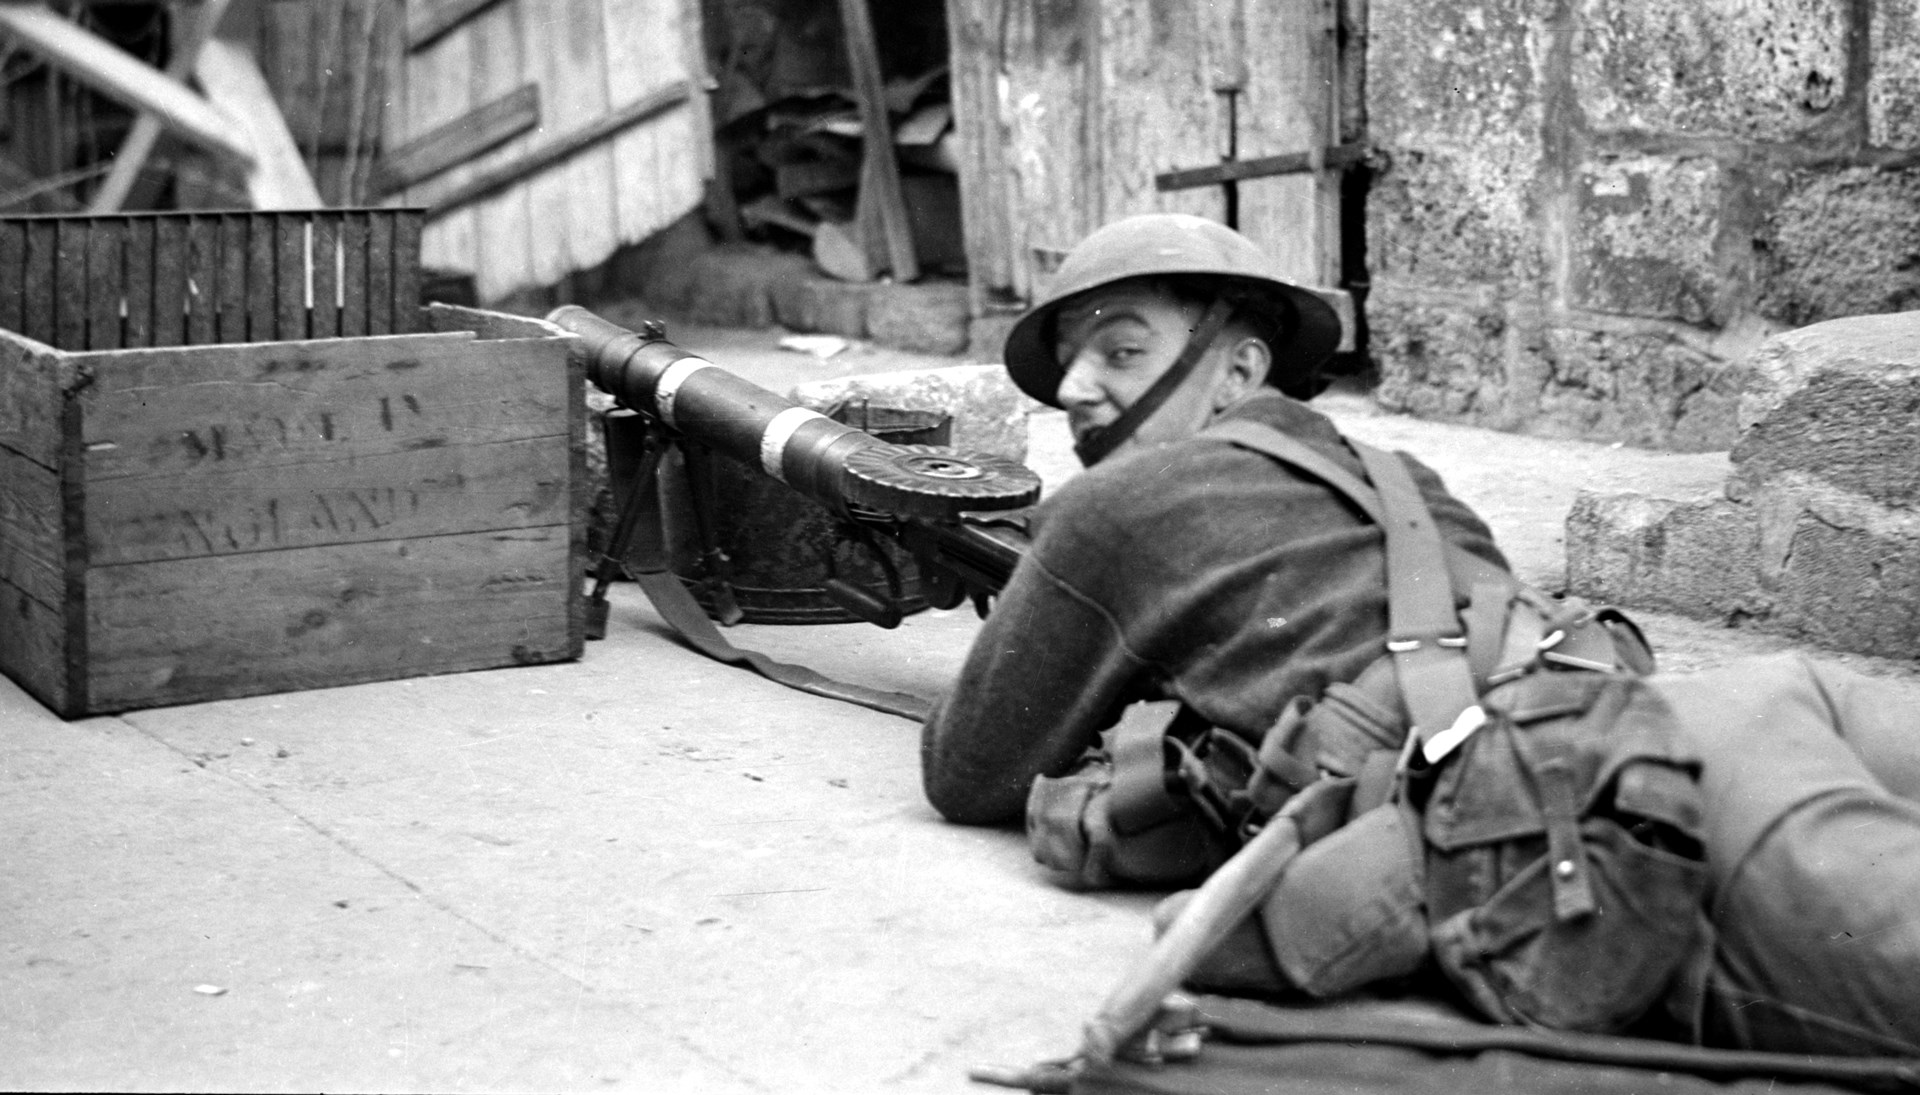 A Lewis gunner on the streets of Jerusalem during 1938.  The Lewis had proven itself during World War One and remained as the British light machine gun until the Bren was fully issued by 1939.  Note the standard 47-round pan magazine (with an additional magazine carried in the canvass holder on the gunner’s hip).  Library of Congress